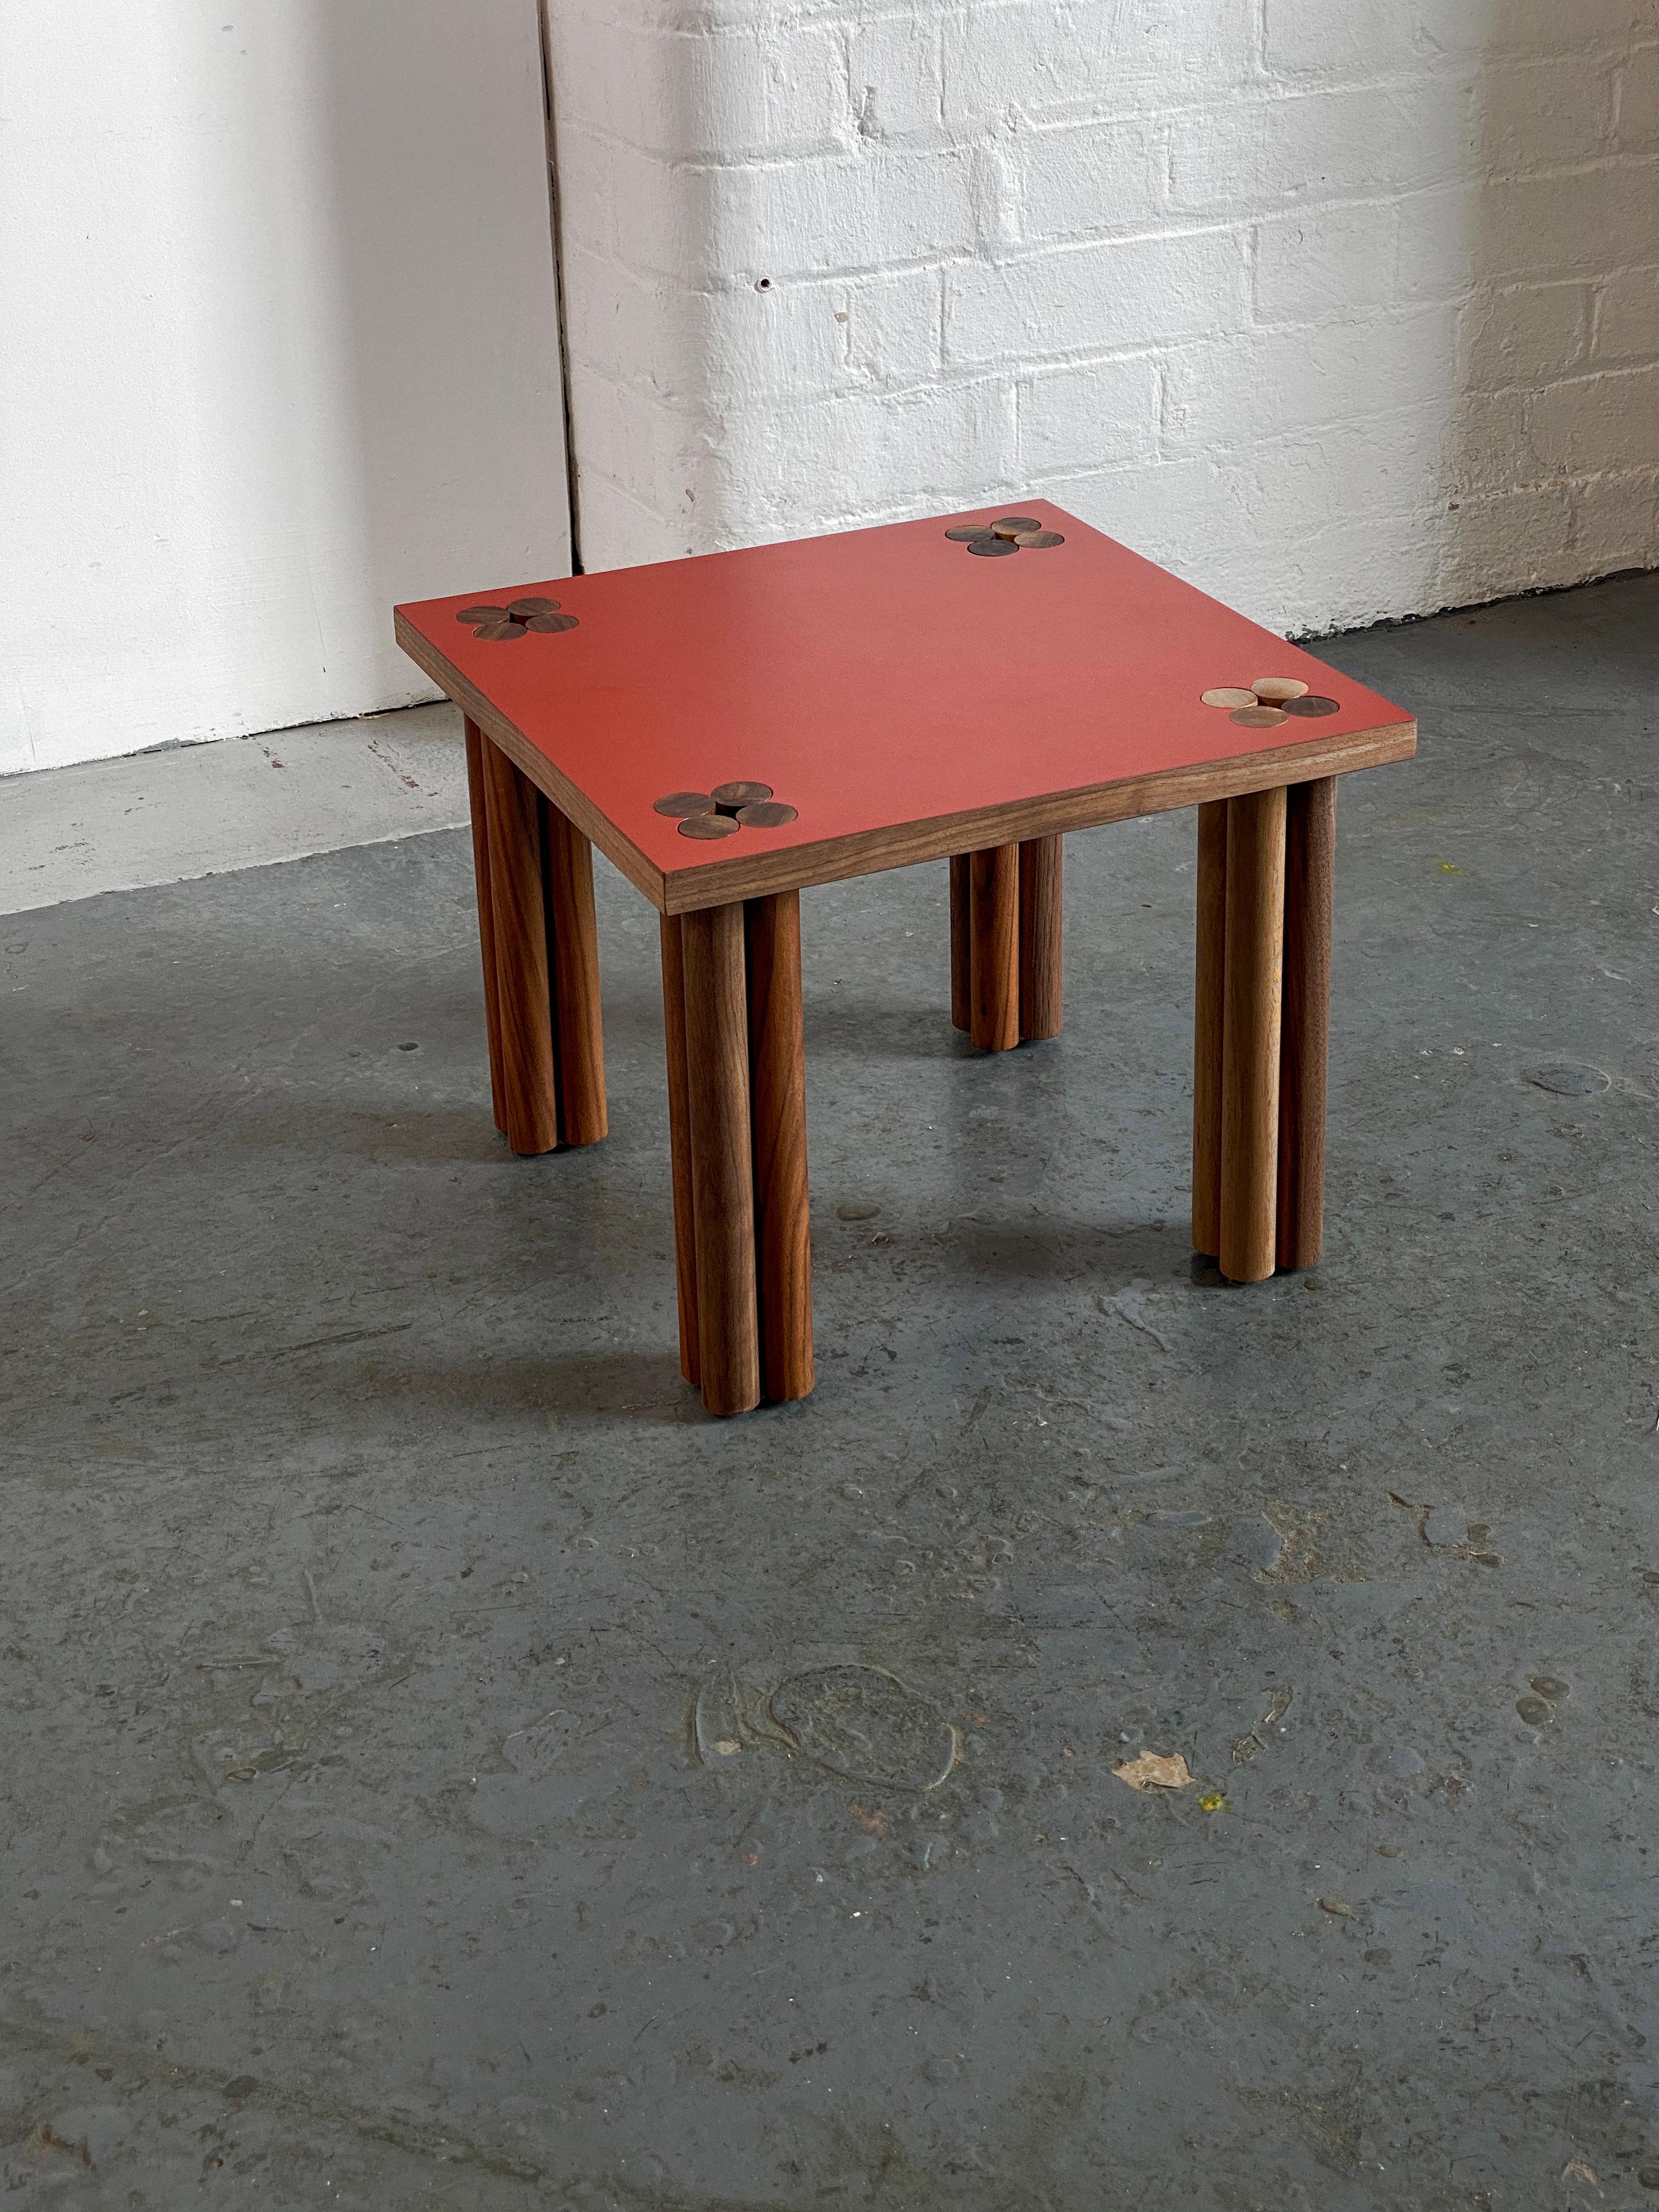 Red (Paprika) & Walnut Hana side table
Dimensions: D 35 x W 35 x H 33 cm
Materials: Solid walnut wood, walnut veneer, Formica
Oak or other wood possible. 

Hana is Japanese and means flower - it is a collection of side tables and a sideboard.